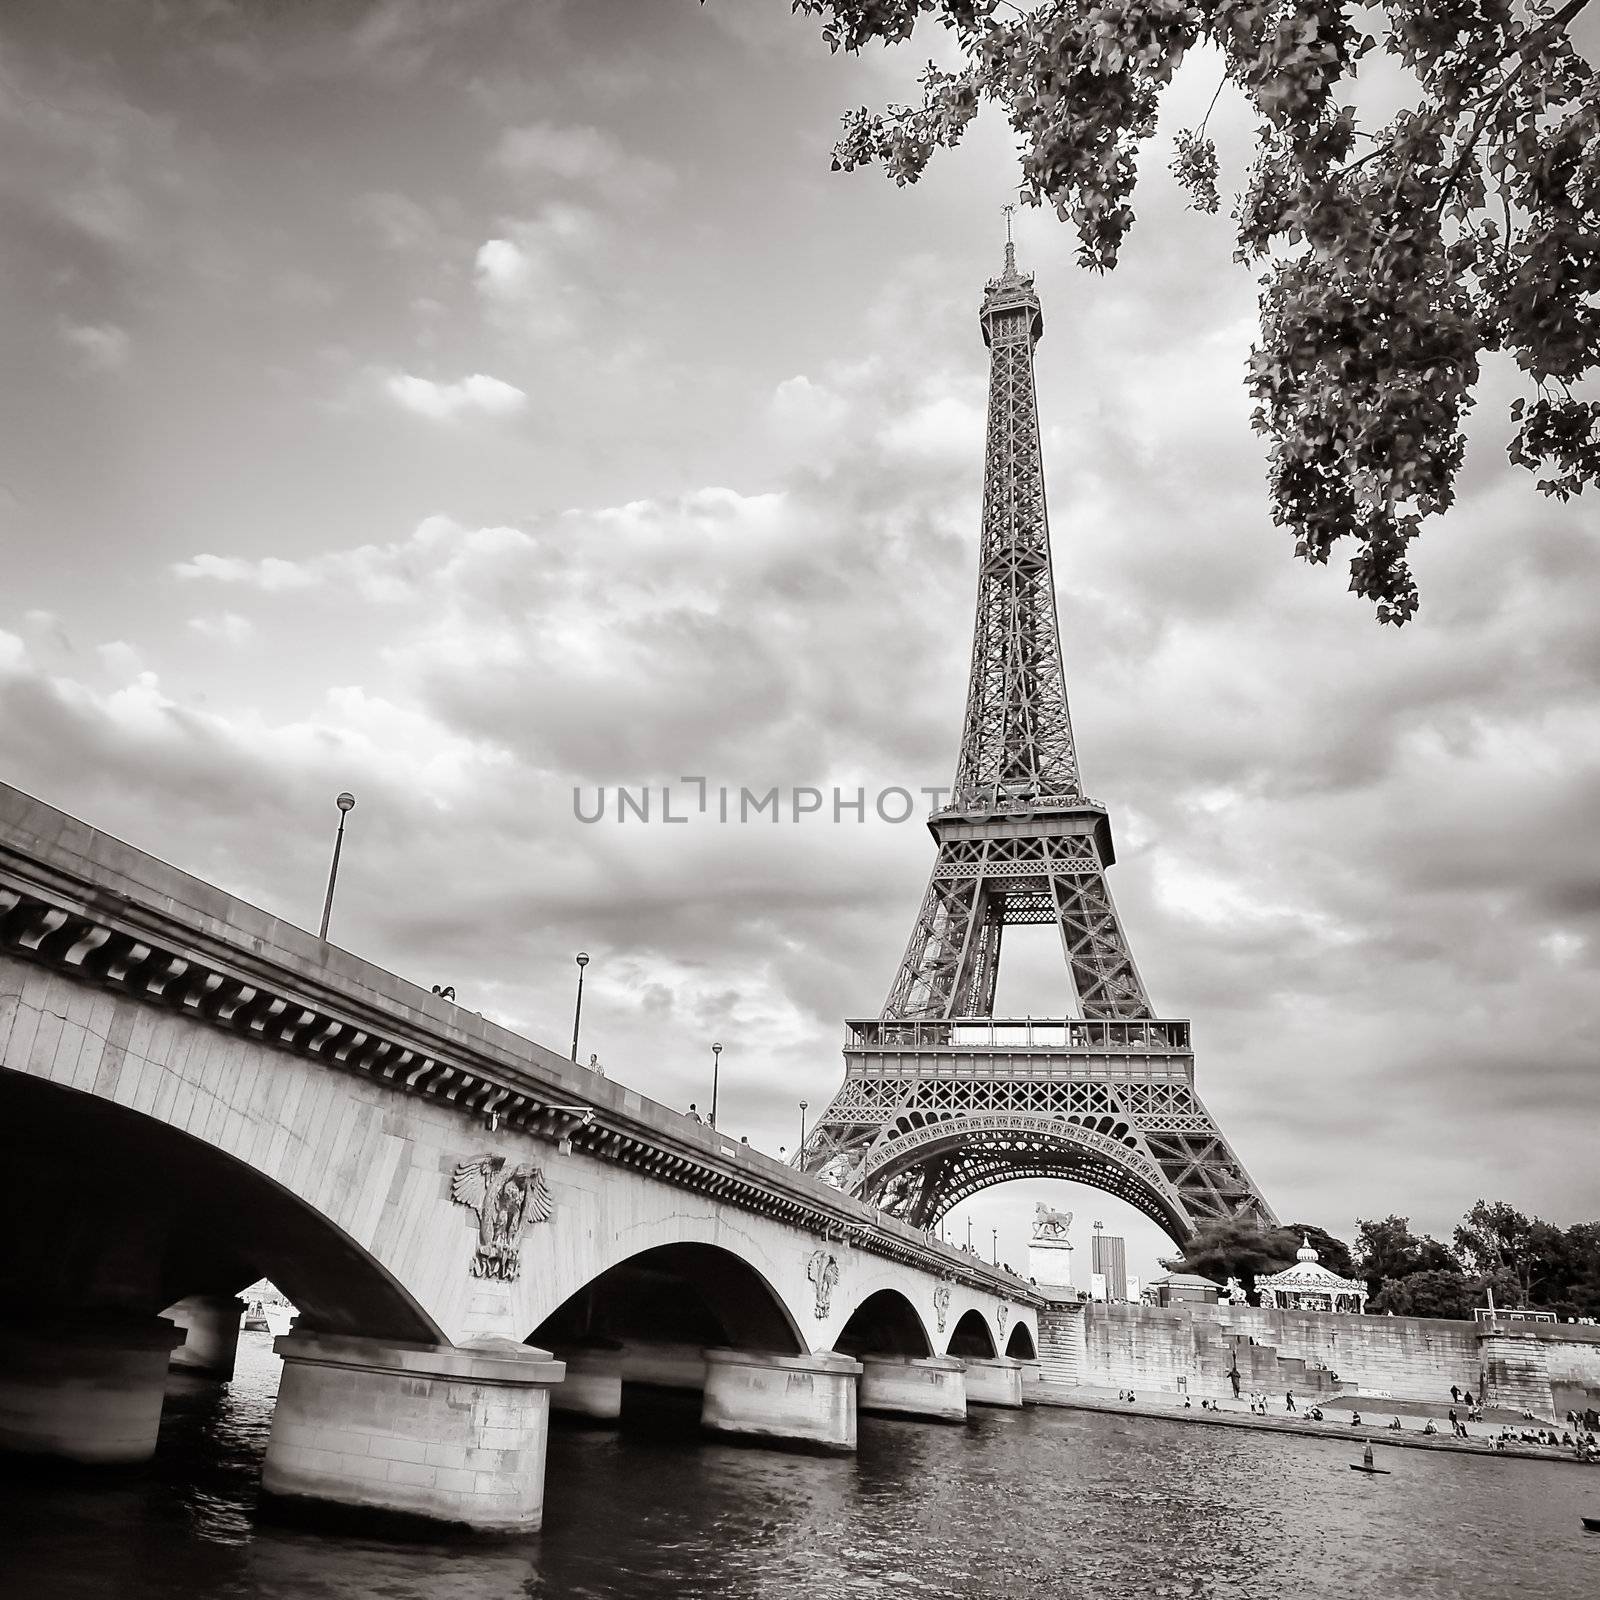 Eiffel tower monochrome view with river and bridge by martinm303